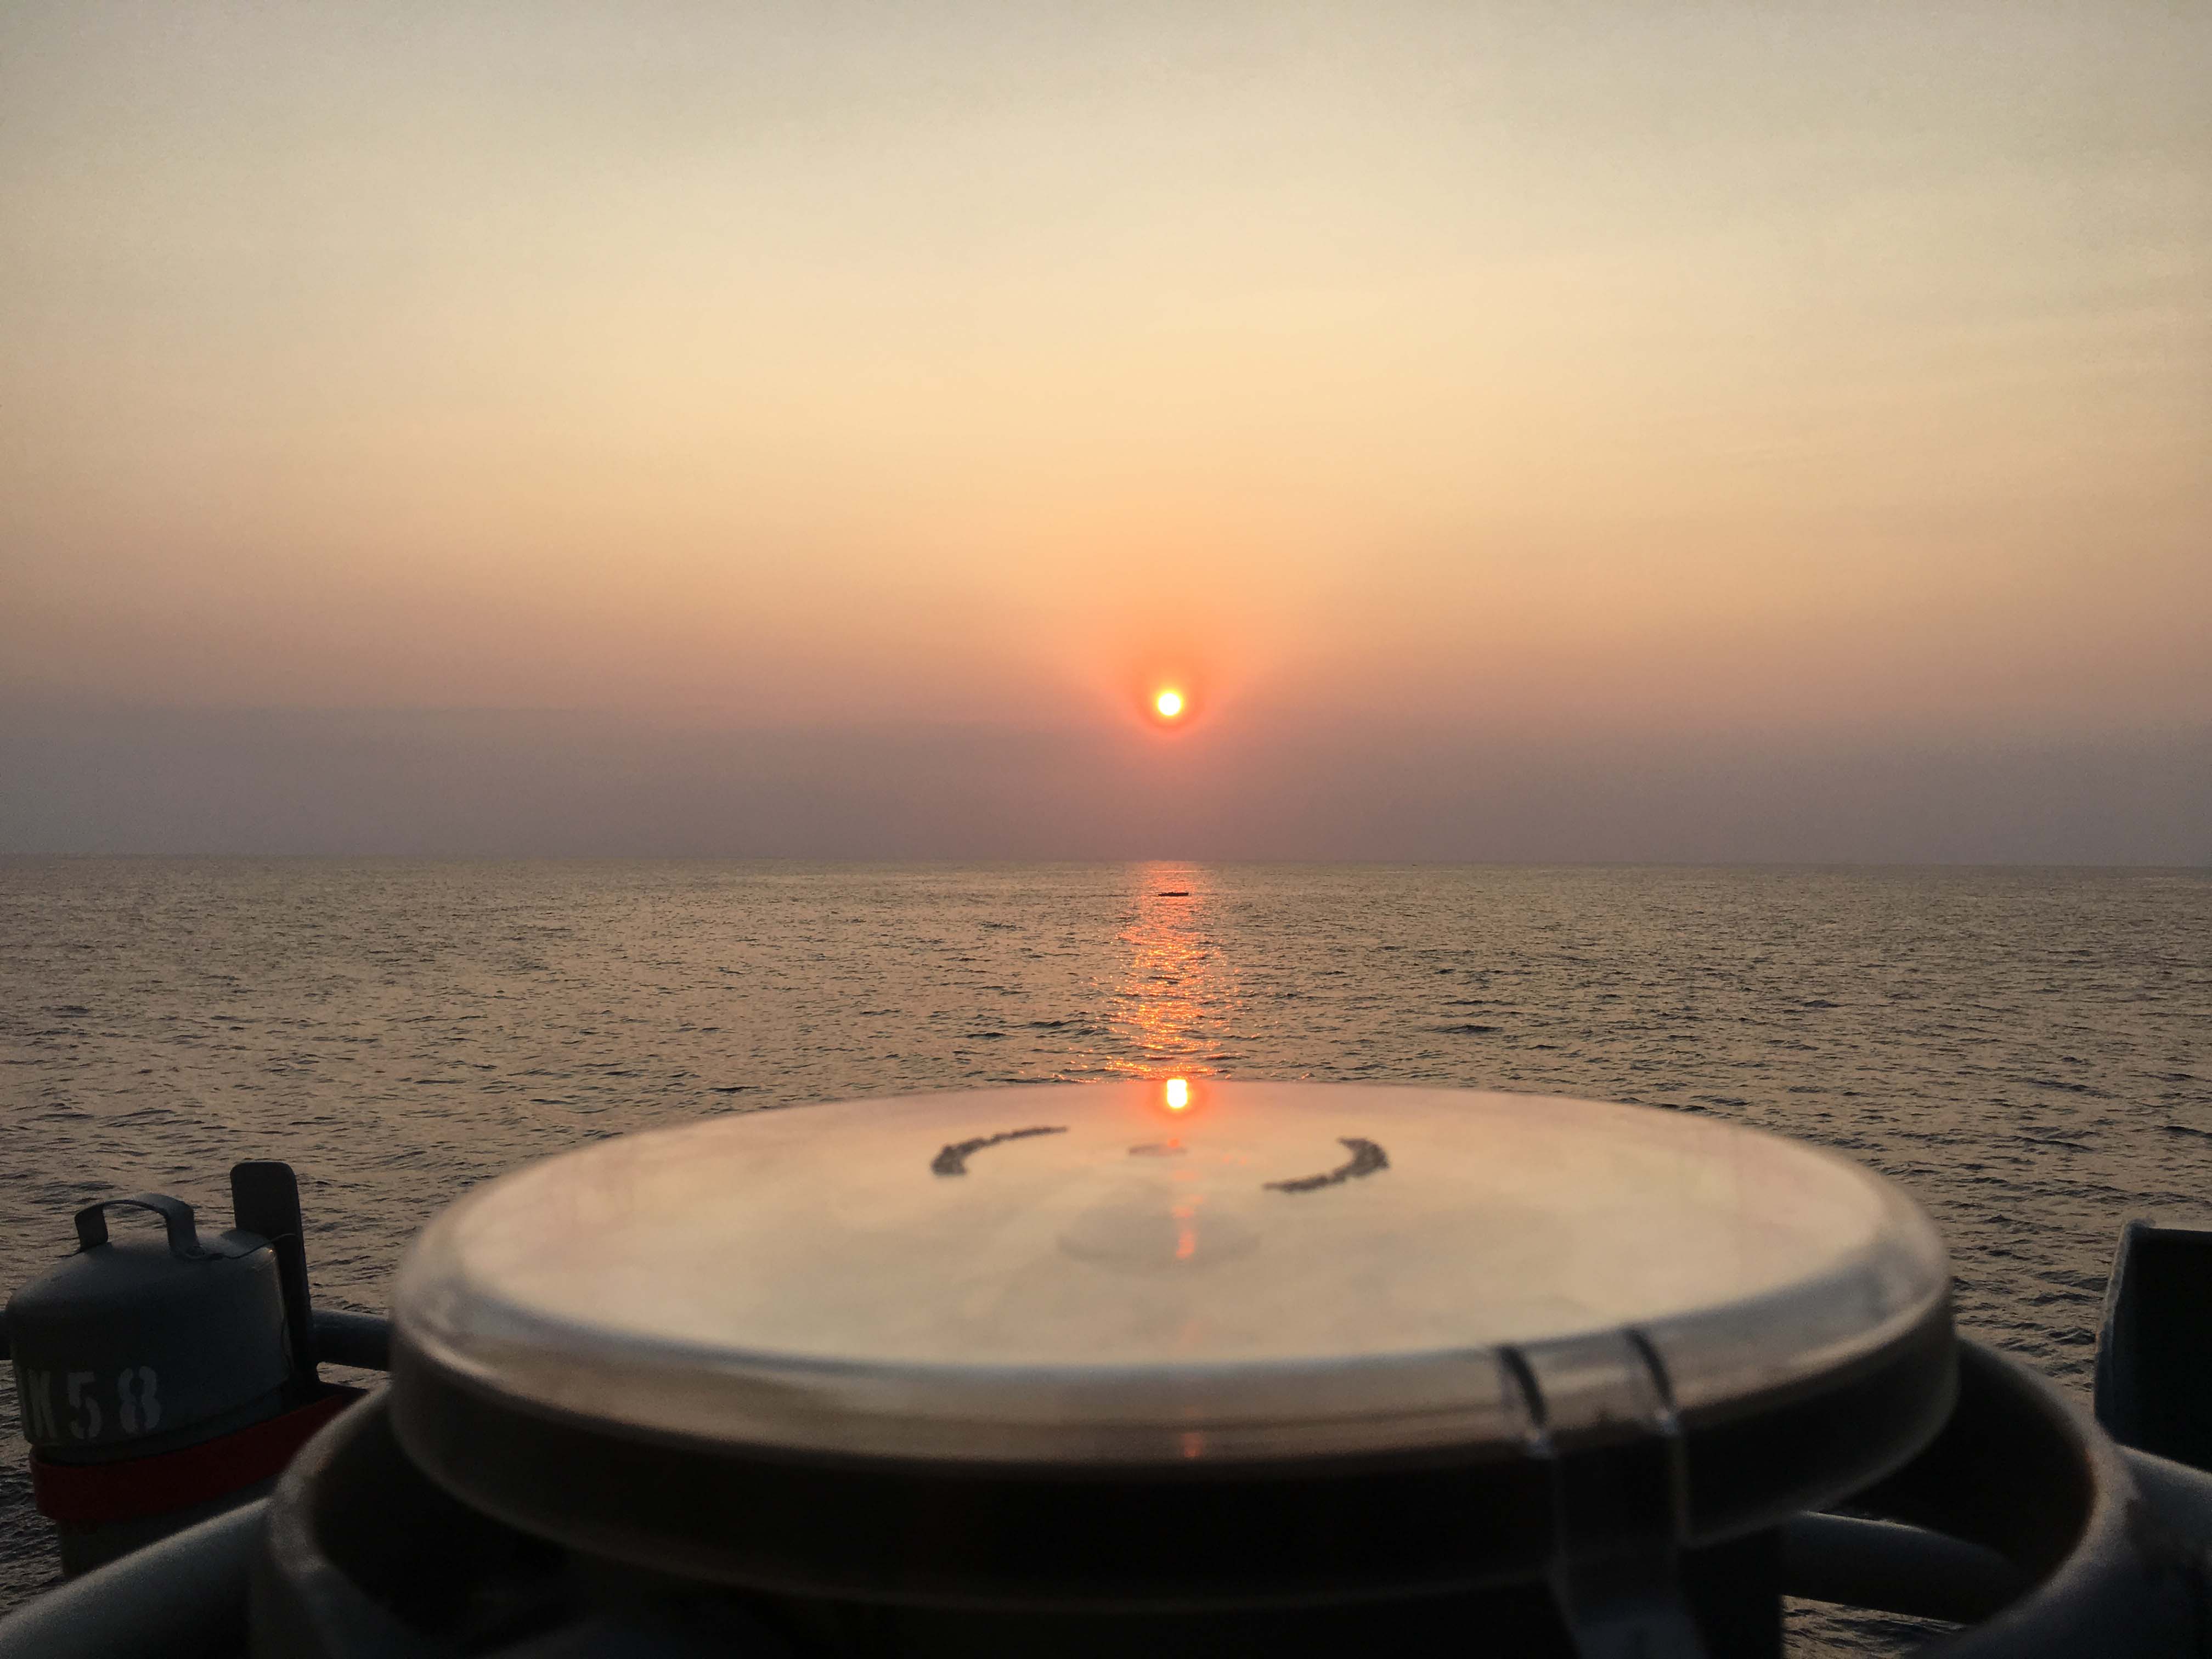 View of the ocean from an US Army vessel.